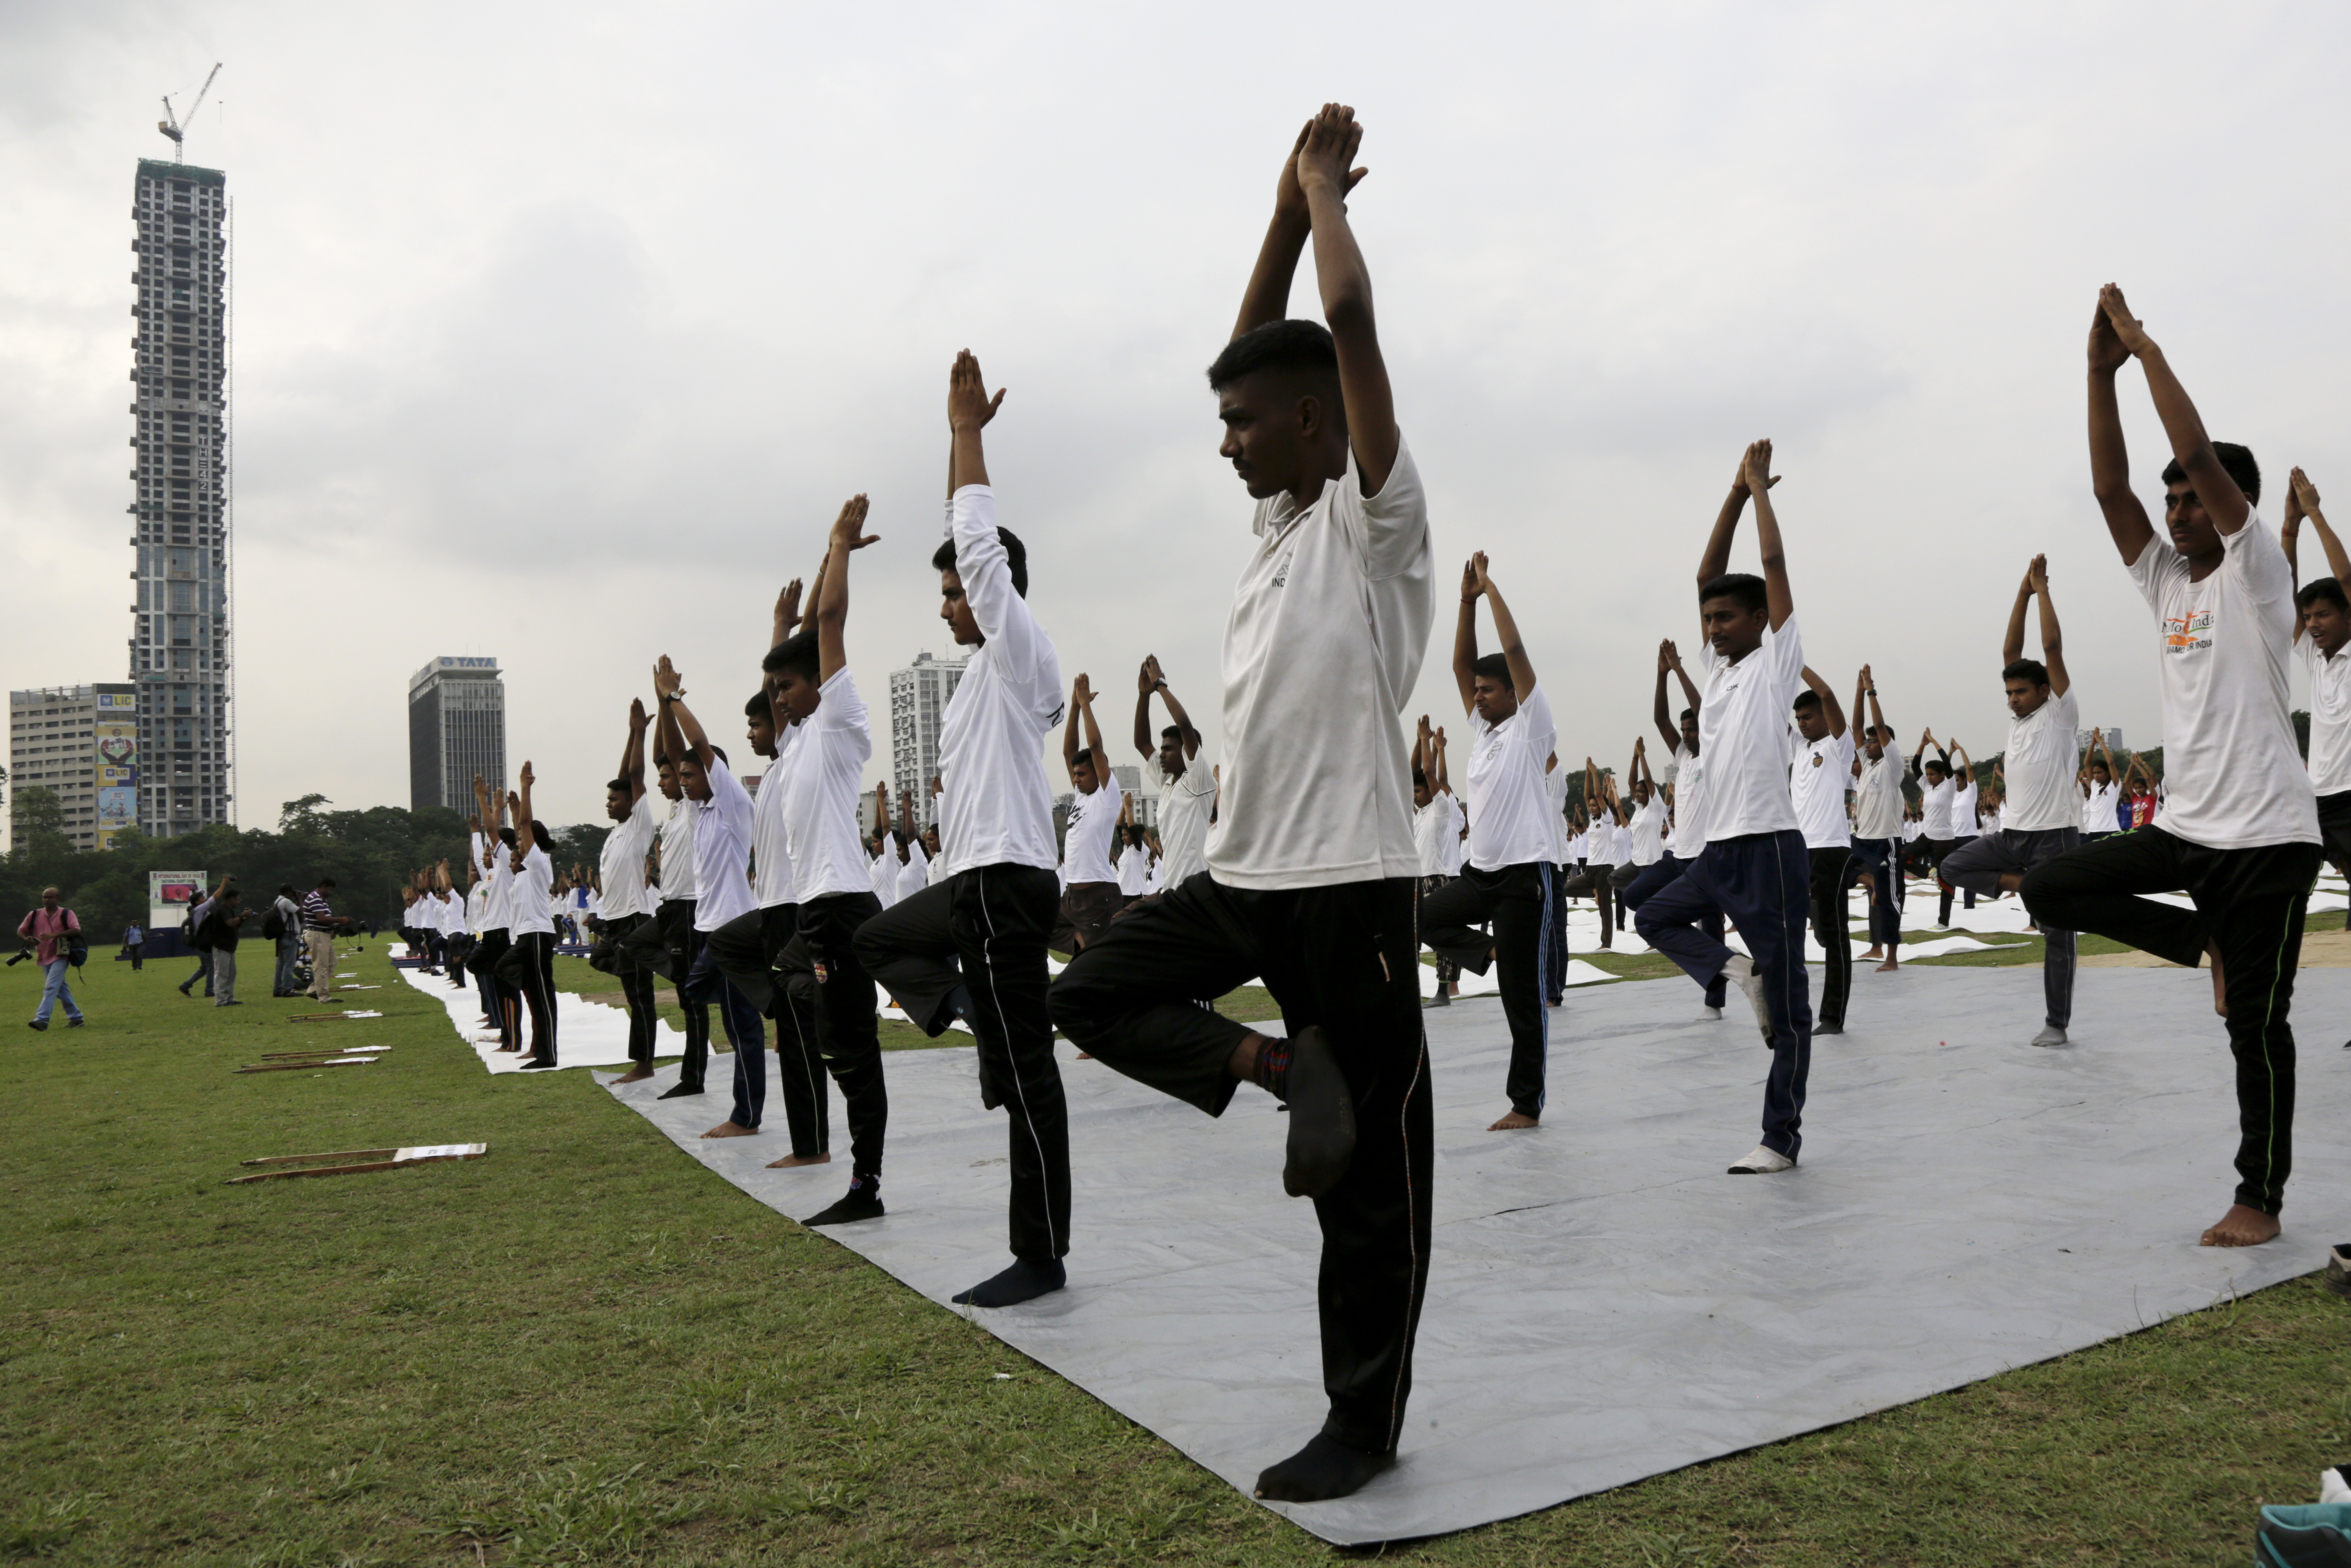 Indians perform Yoga to mark the International Yoga Day in Kolkata, India, Wednesday, June 21, 2017. Yoga practitioners took a relaxing break to bend, twist and pose Wednesday morning for the annual event celebrating the practice, especially in the country where it began. (AP Photo/Bikas Das)